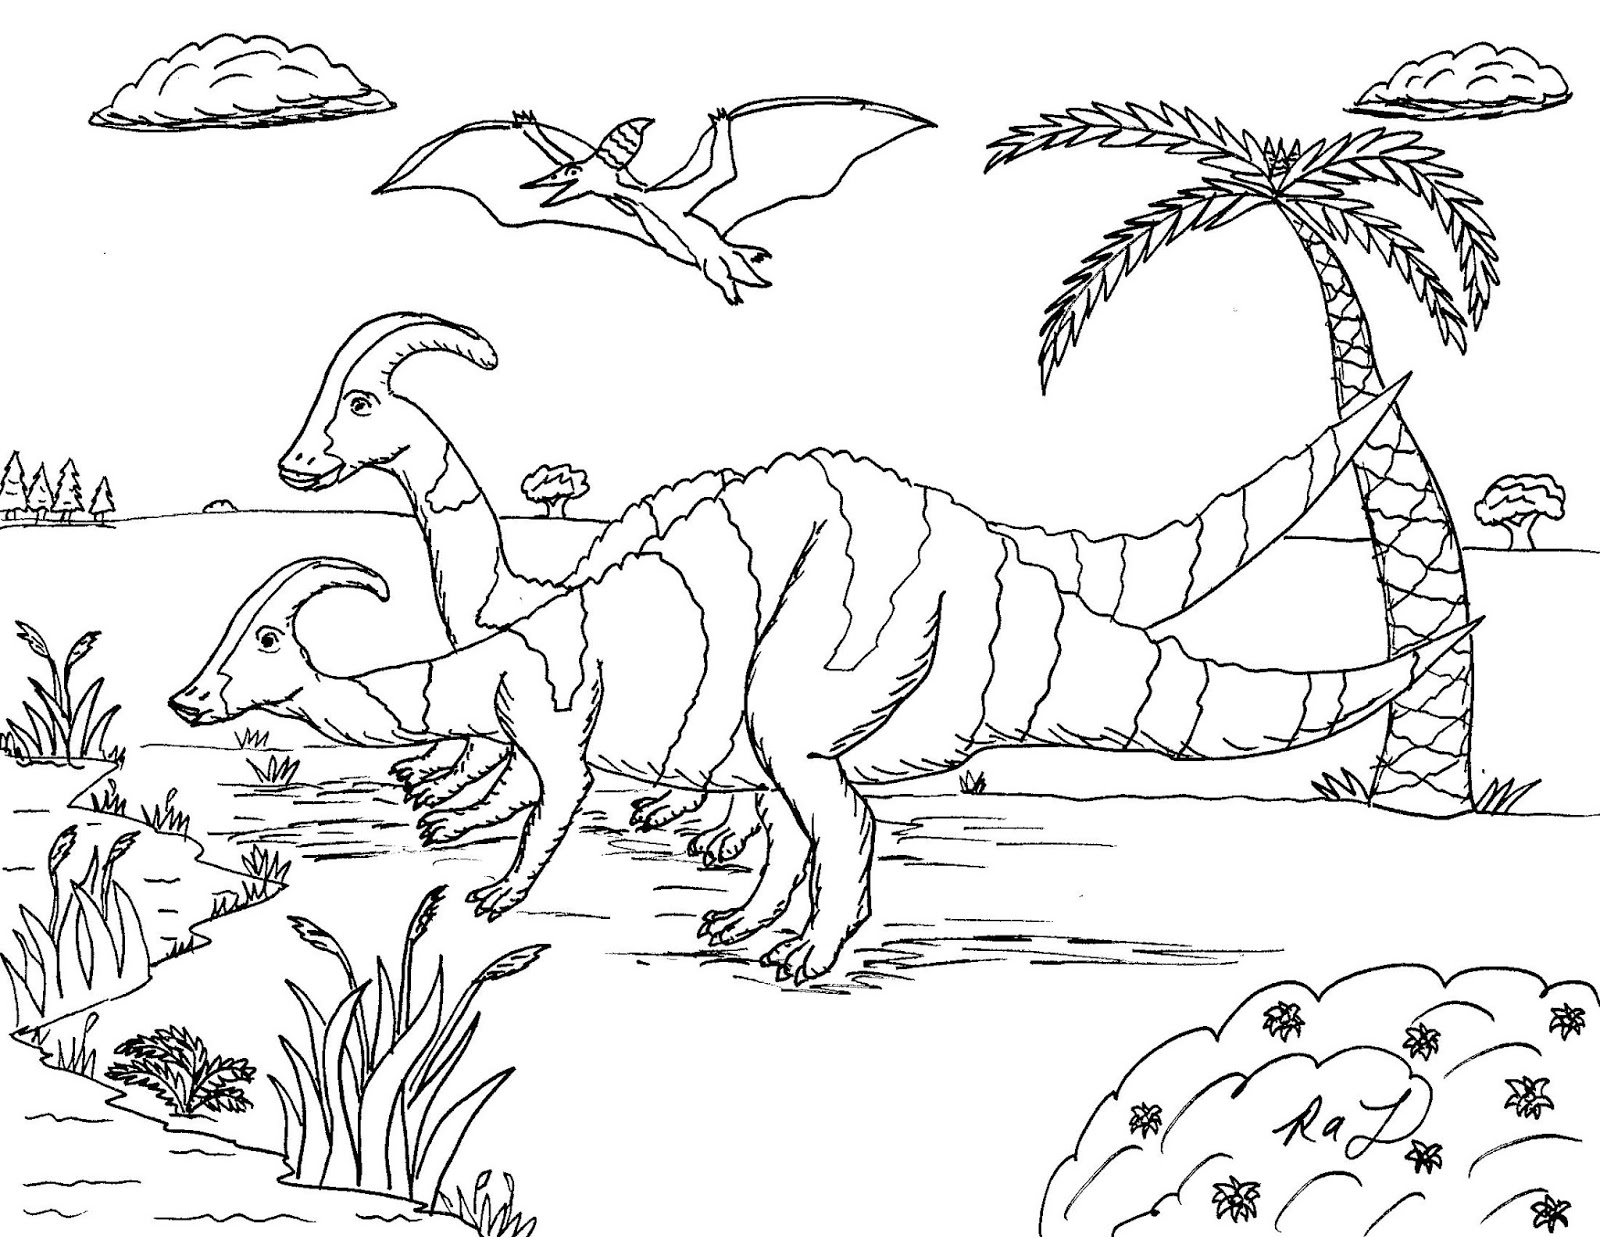 Robin's Great Coloring Pages: Types of Dinosaurs worksheet